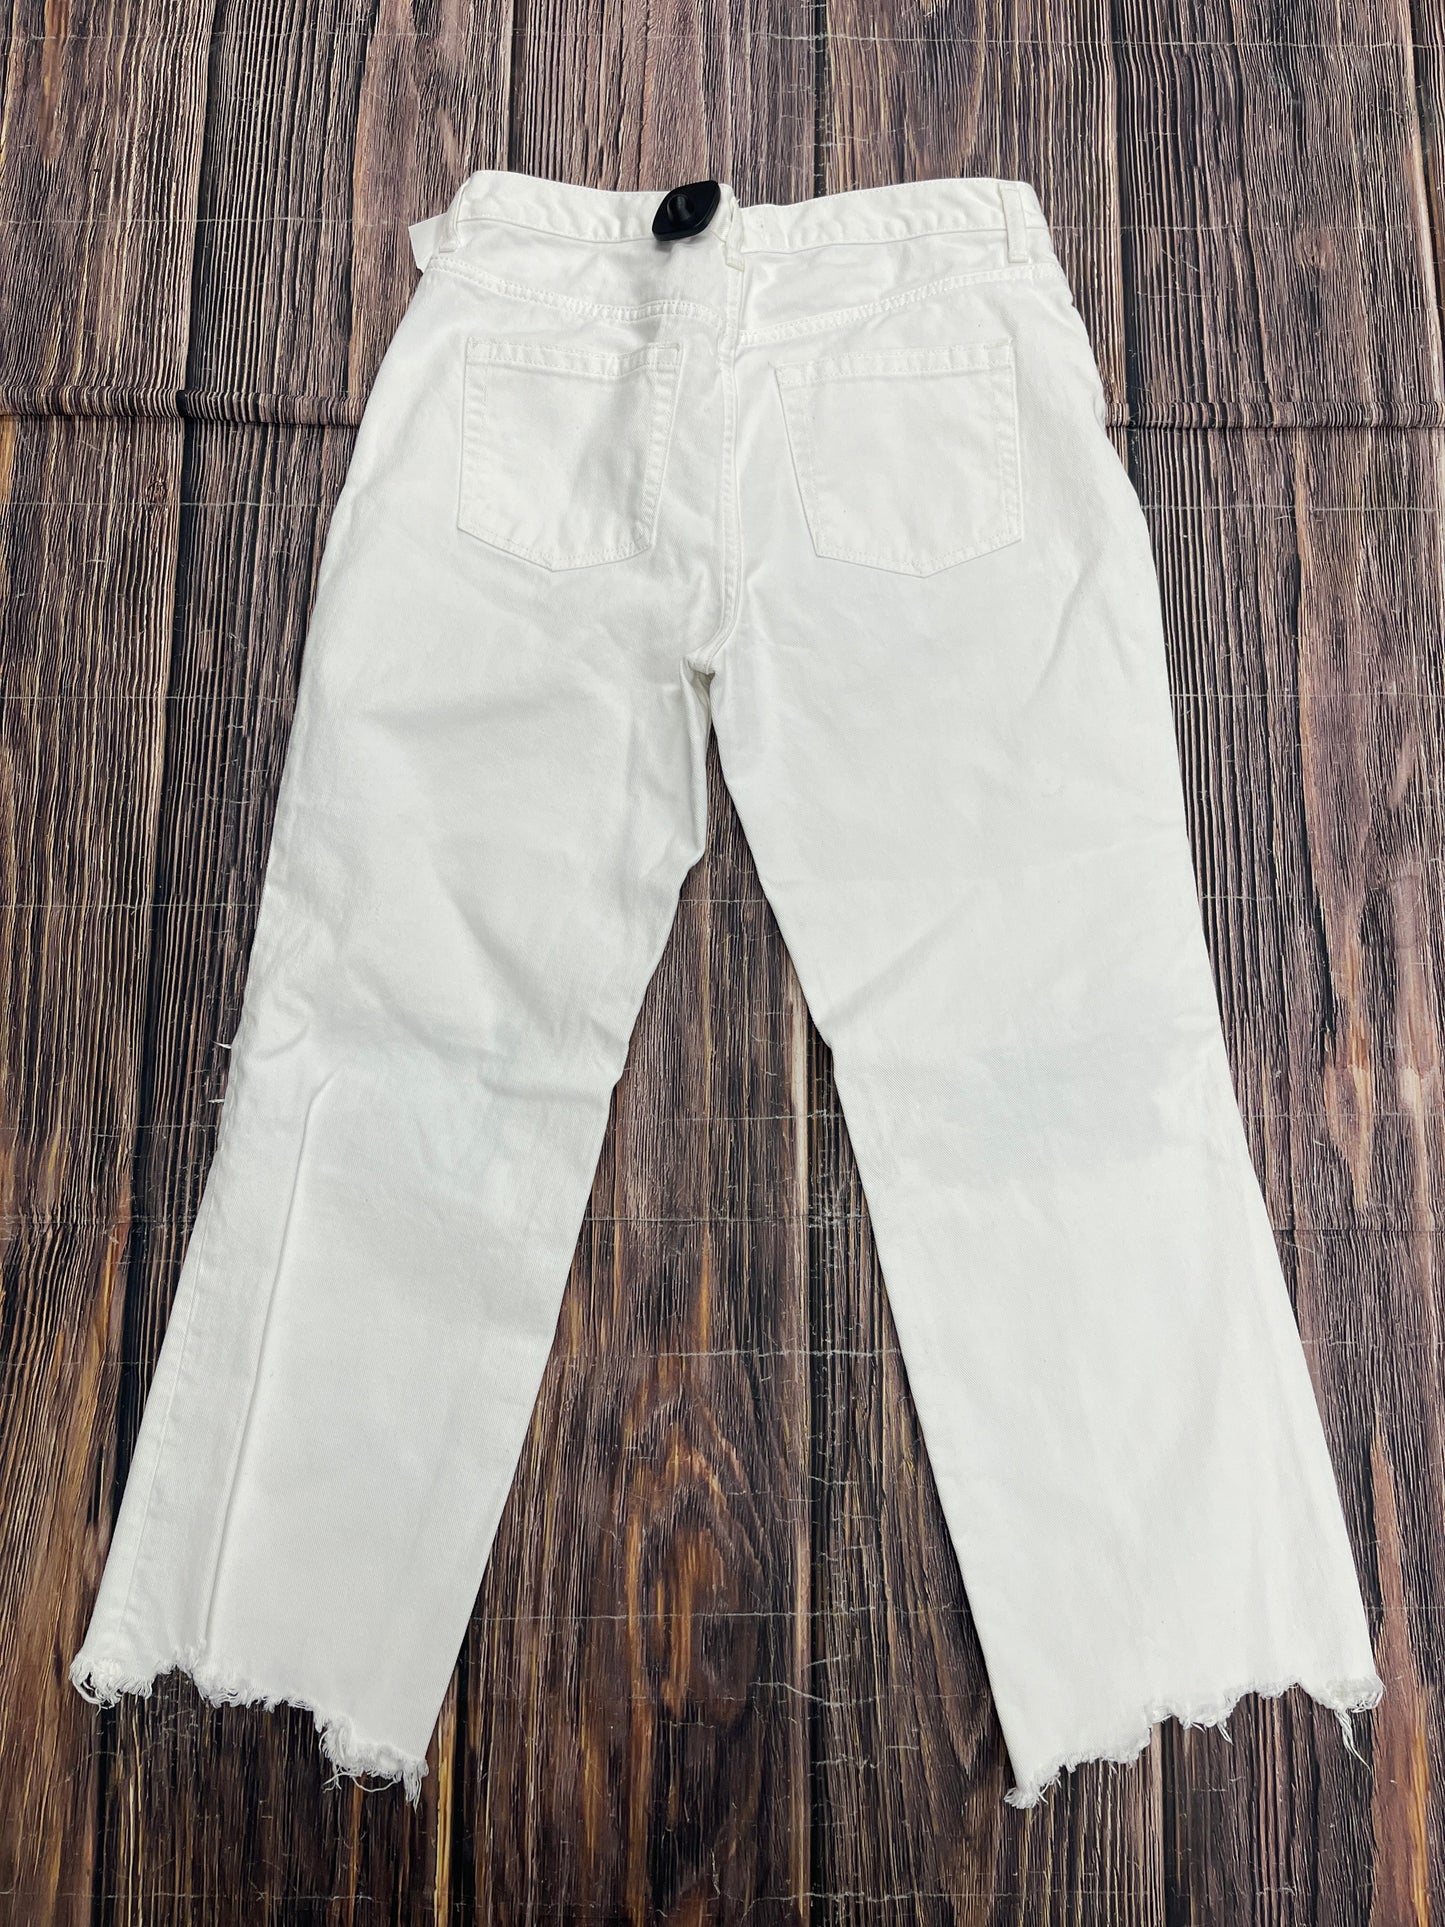 White Pants Other Free People, Size 8